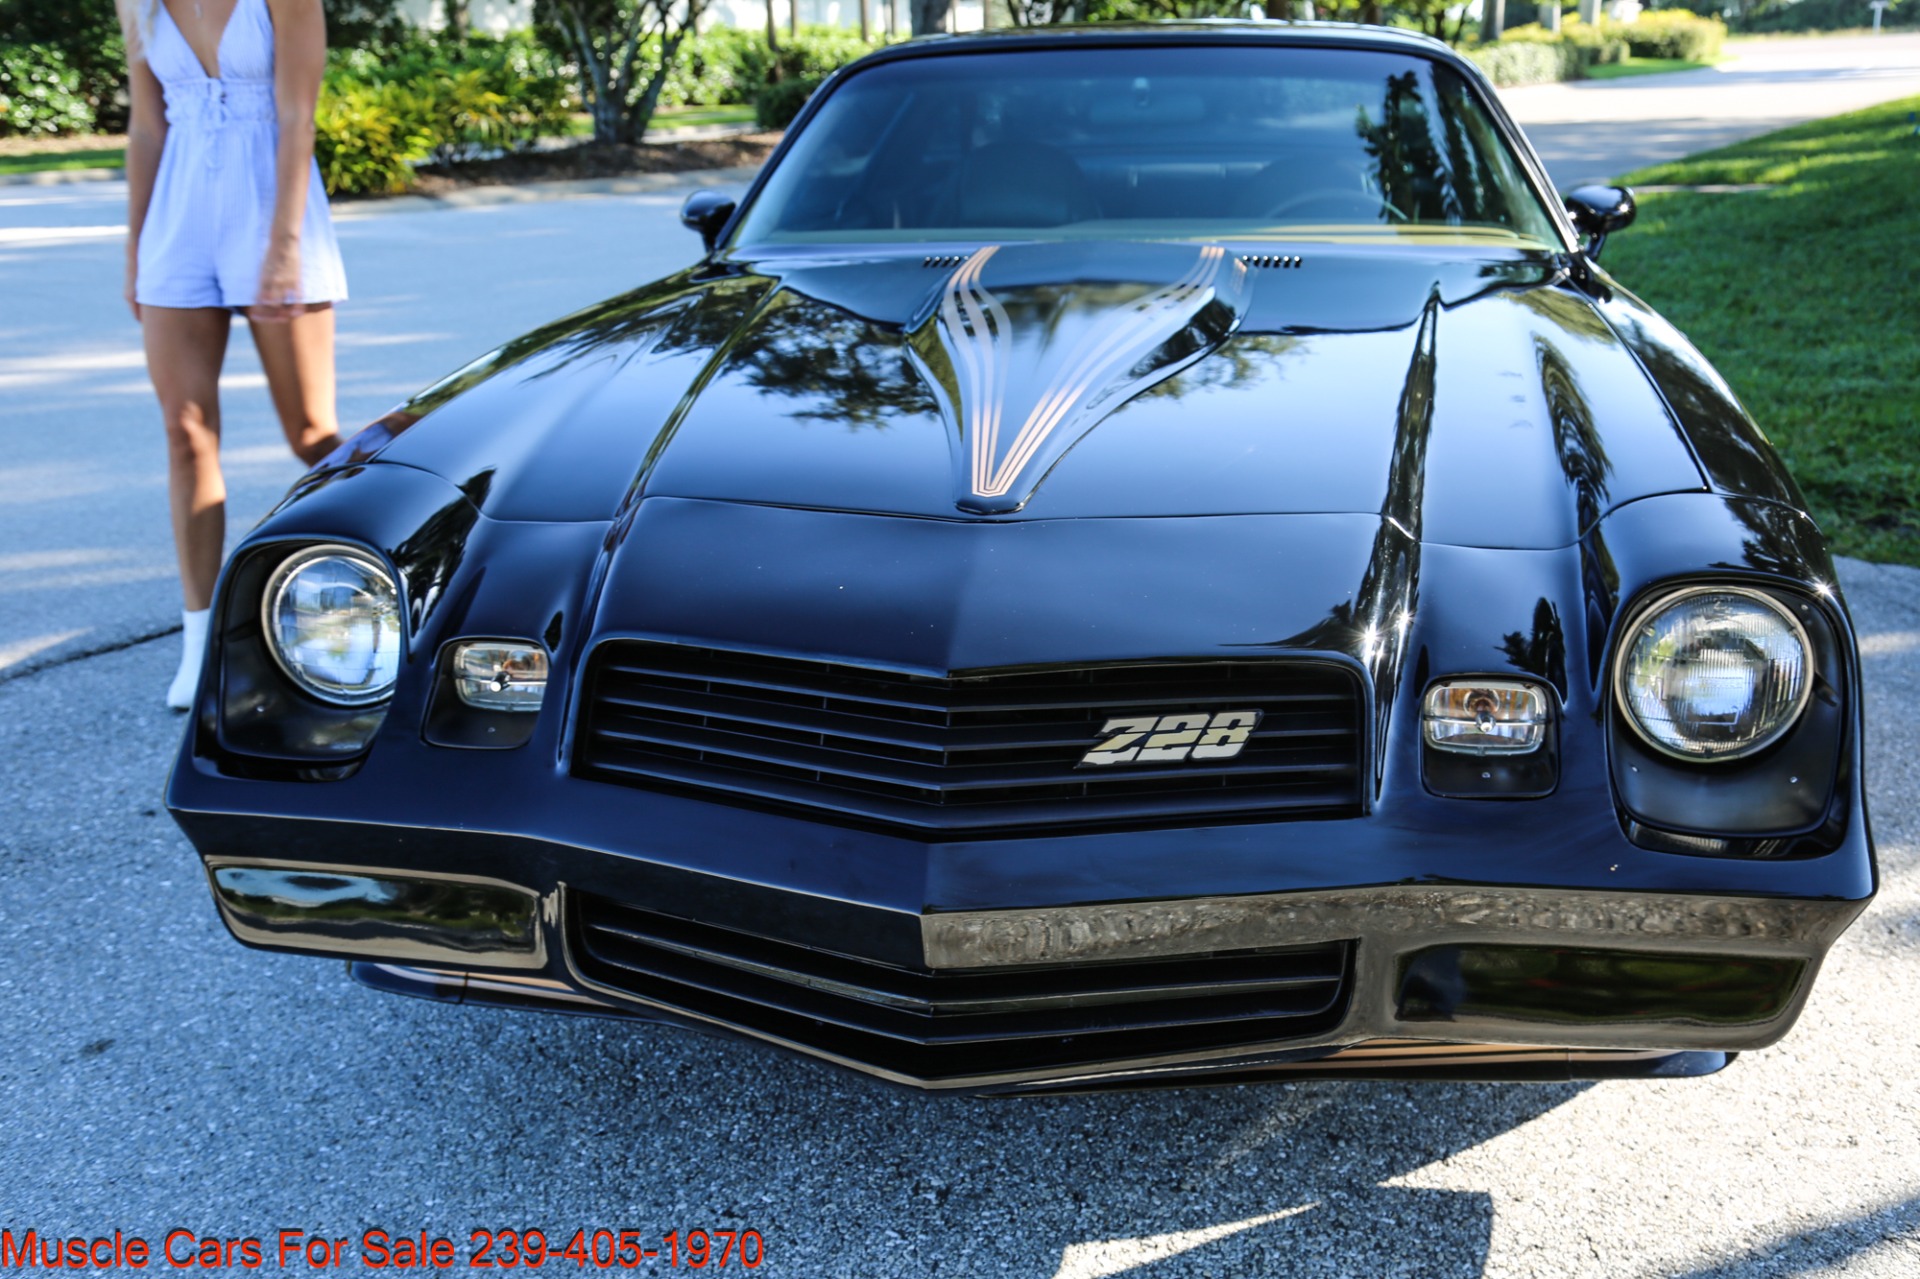 Used 1980 Chevrolet Camaro Z28 14454 Miles for sale Sold at Muscle Cars for Sale Inc. in Fort Myers FL 33912 6